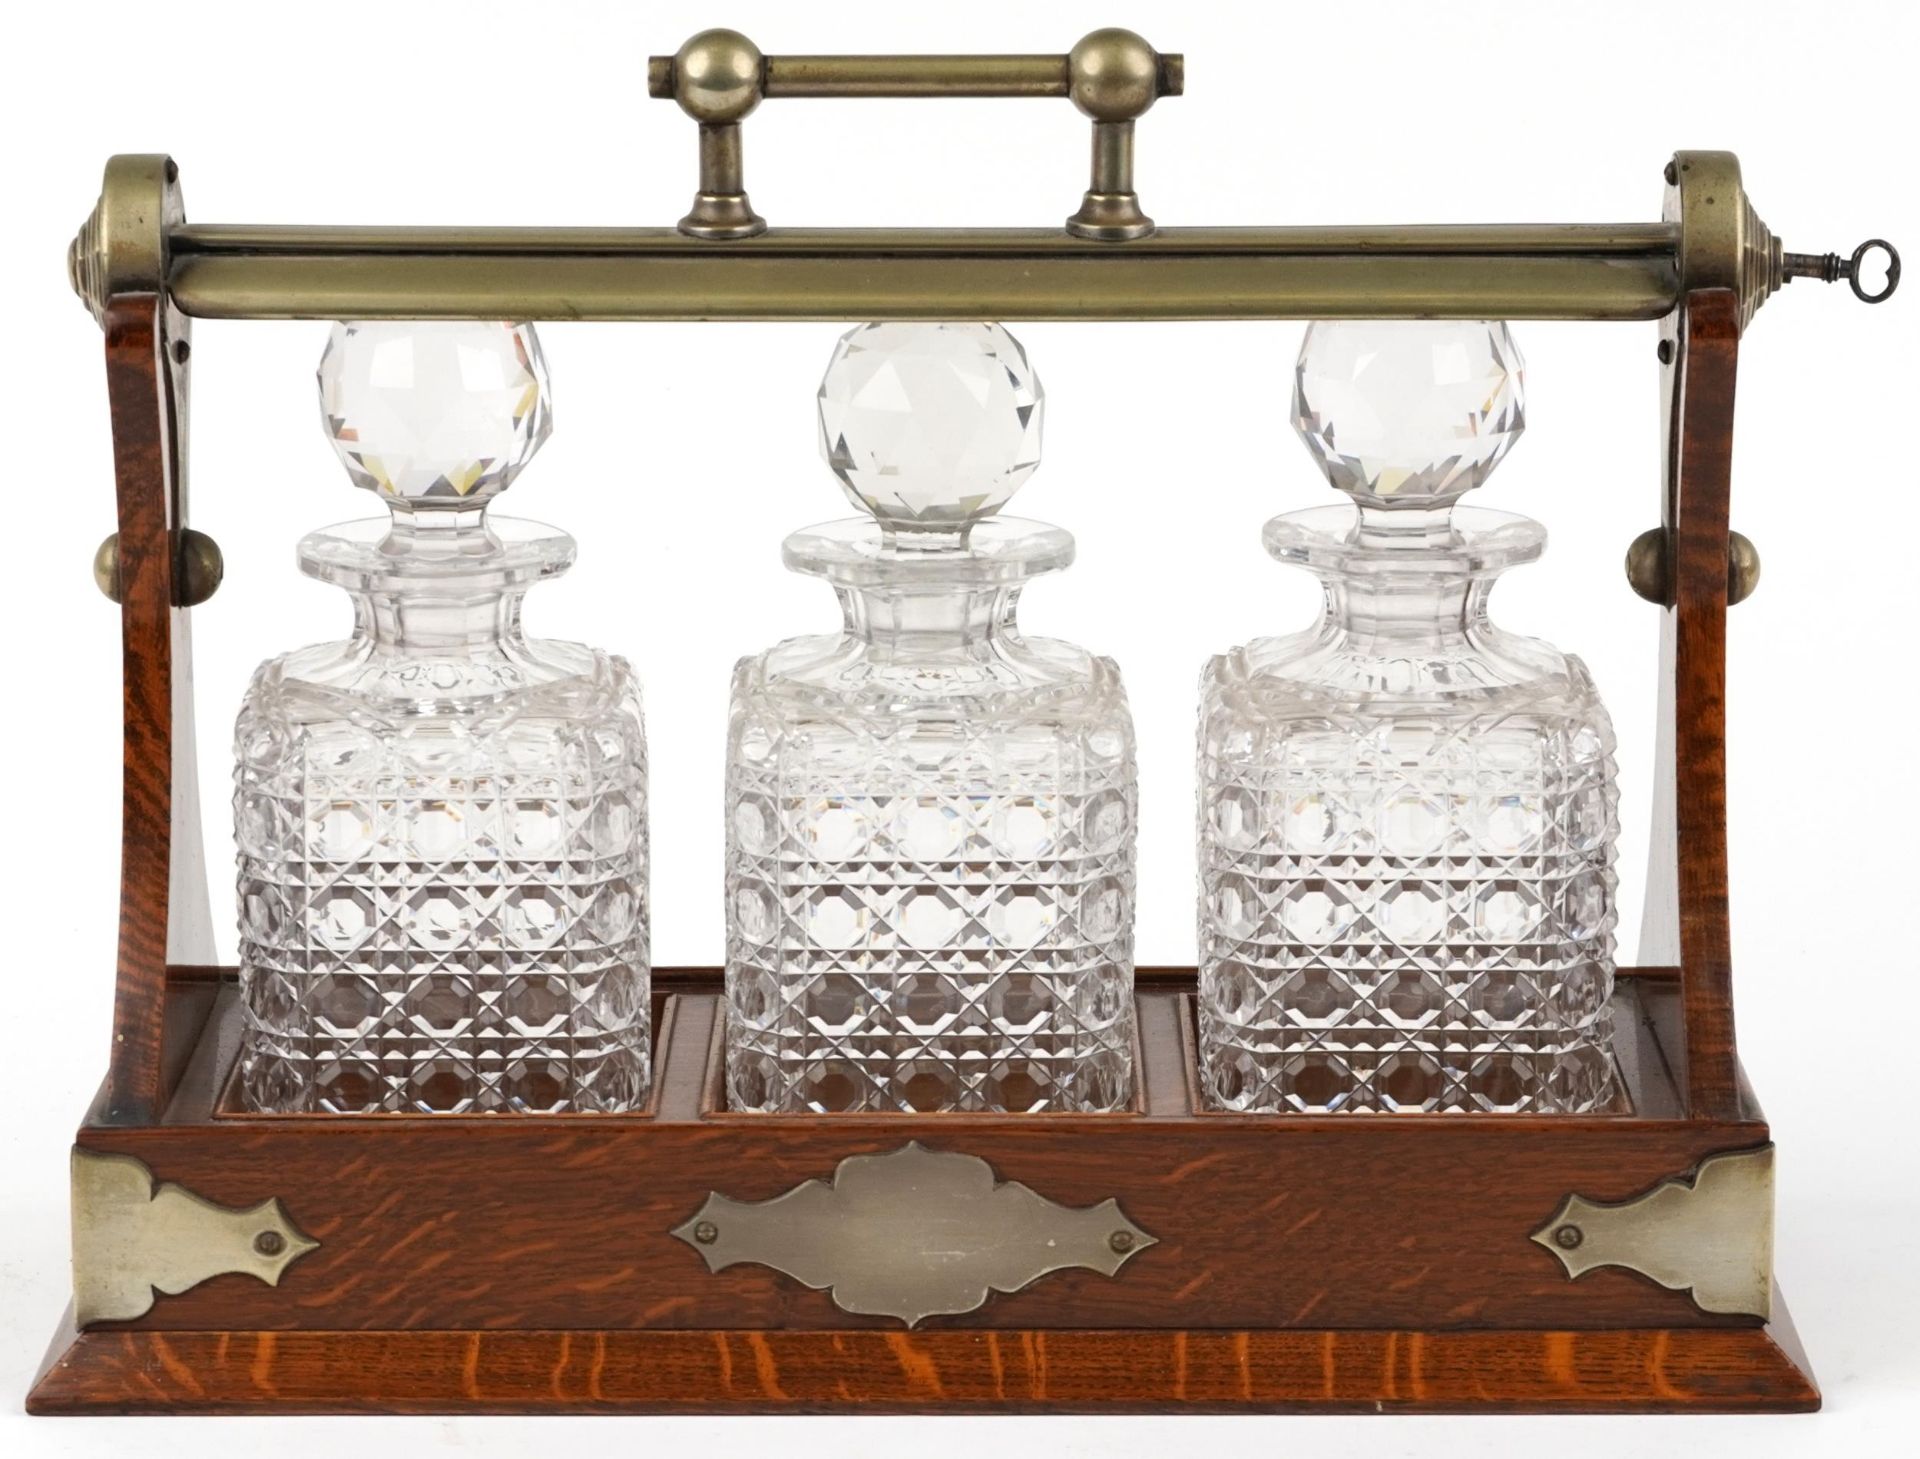 Edwardian oak Grimsell's Patent tantalus housing three cut glass decanters, 40cm wide : For - Image 2 of 5